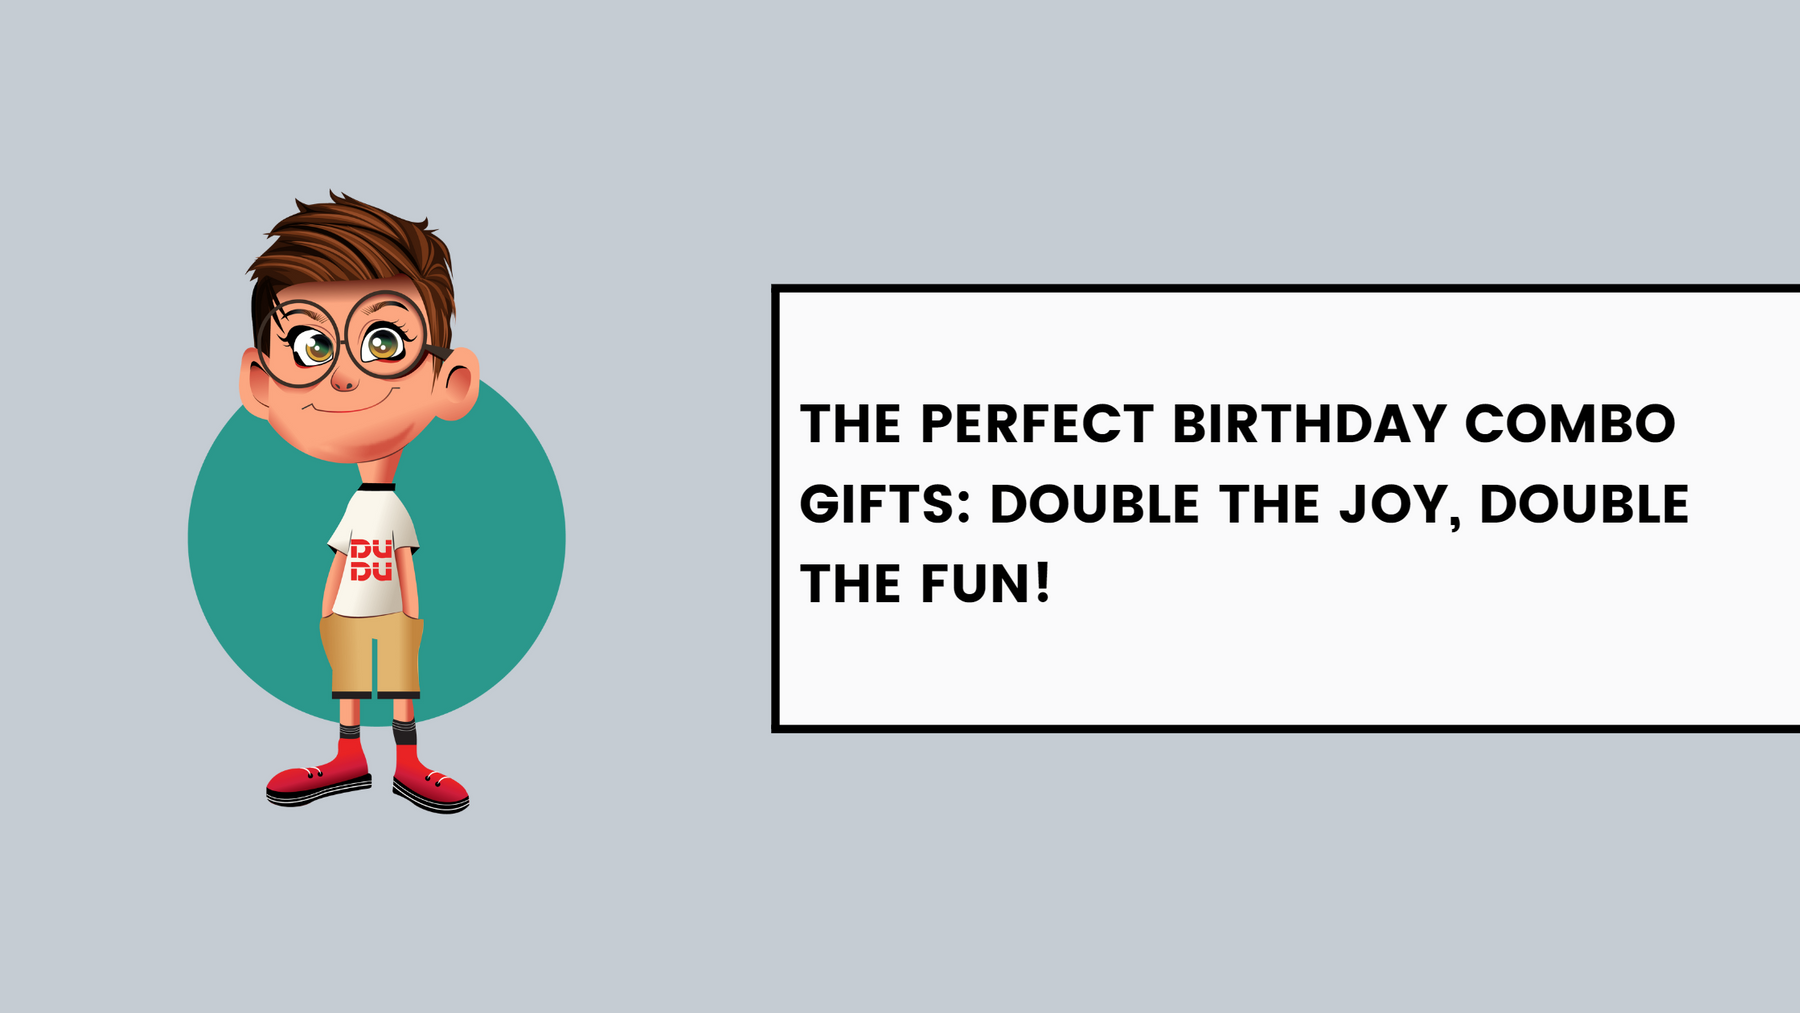 The Perfect Birthday Combo Gifts: Double the Joy, Double the Fun!